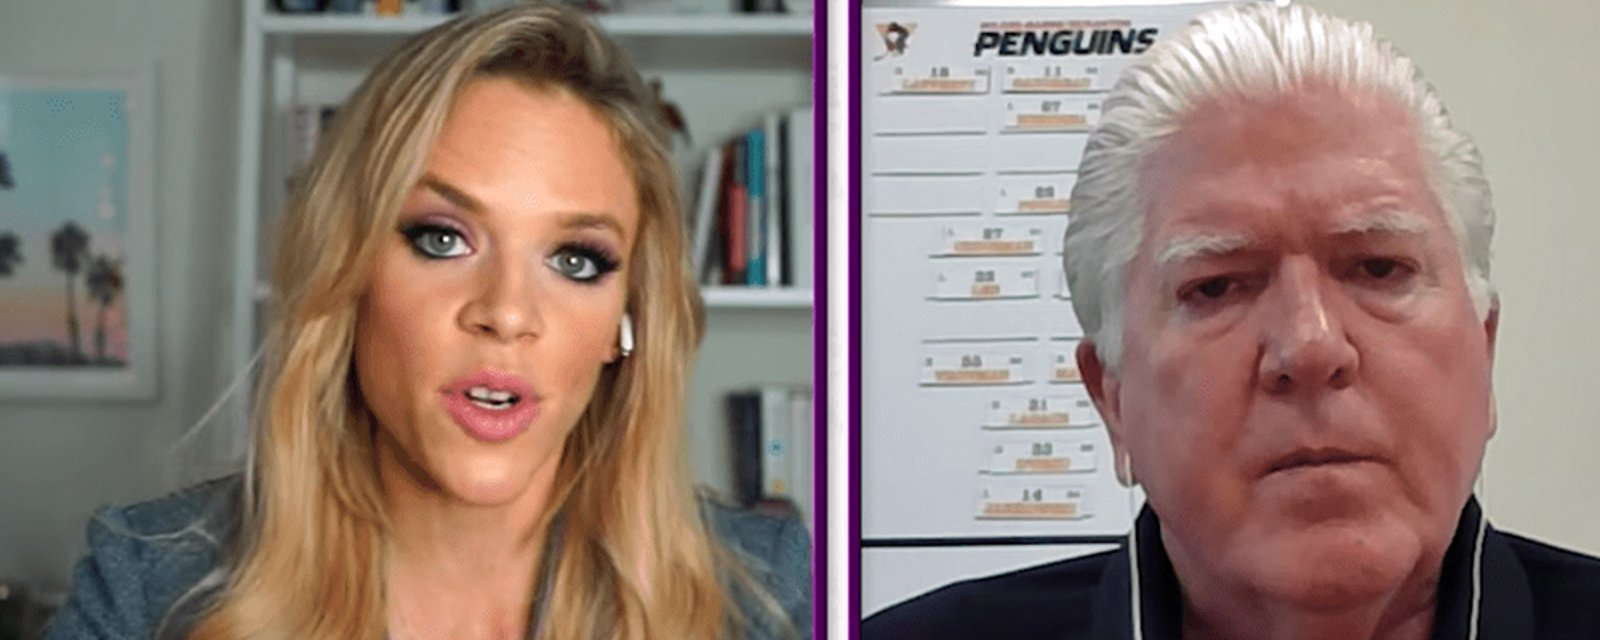 Brian Burke: Penguins “have to make some trades”